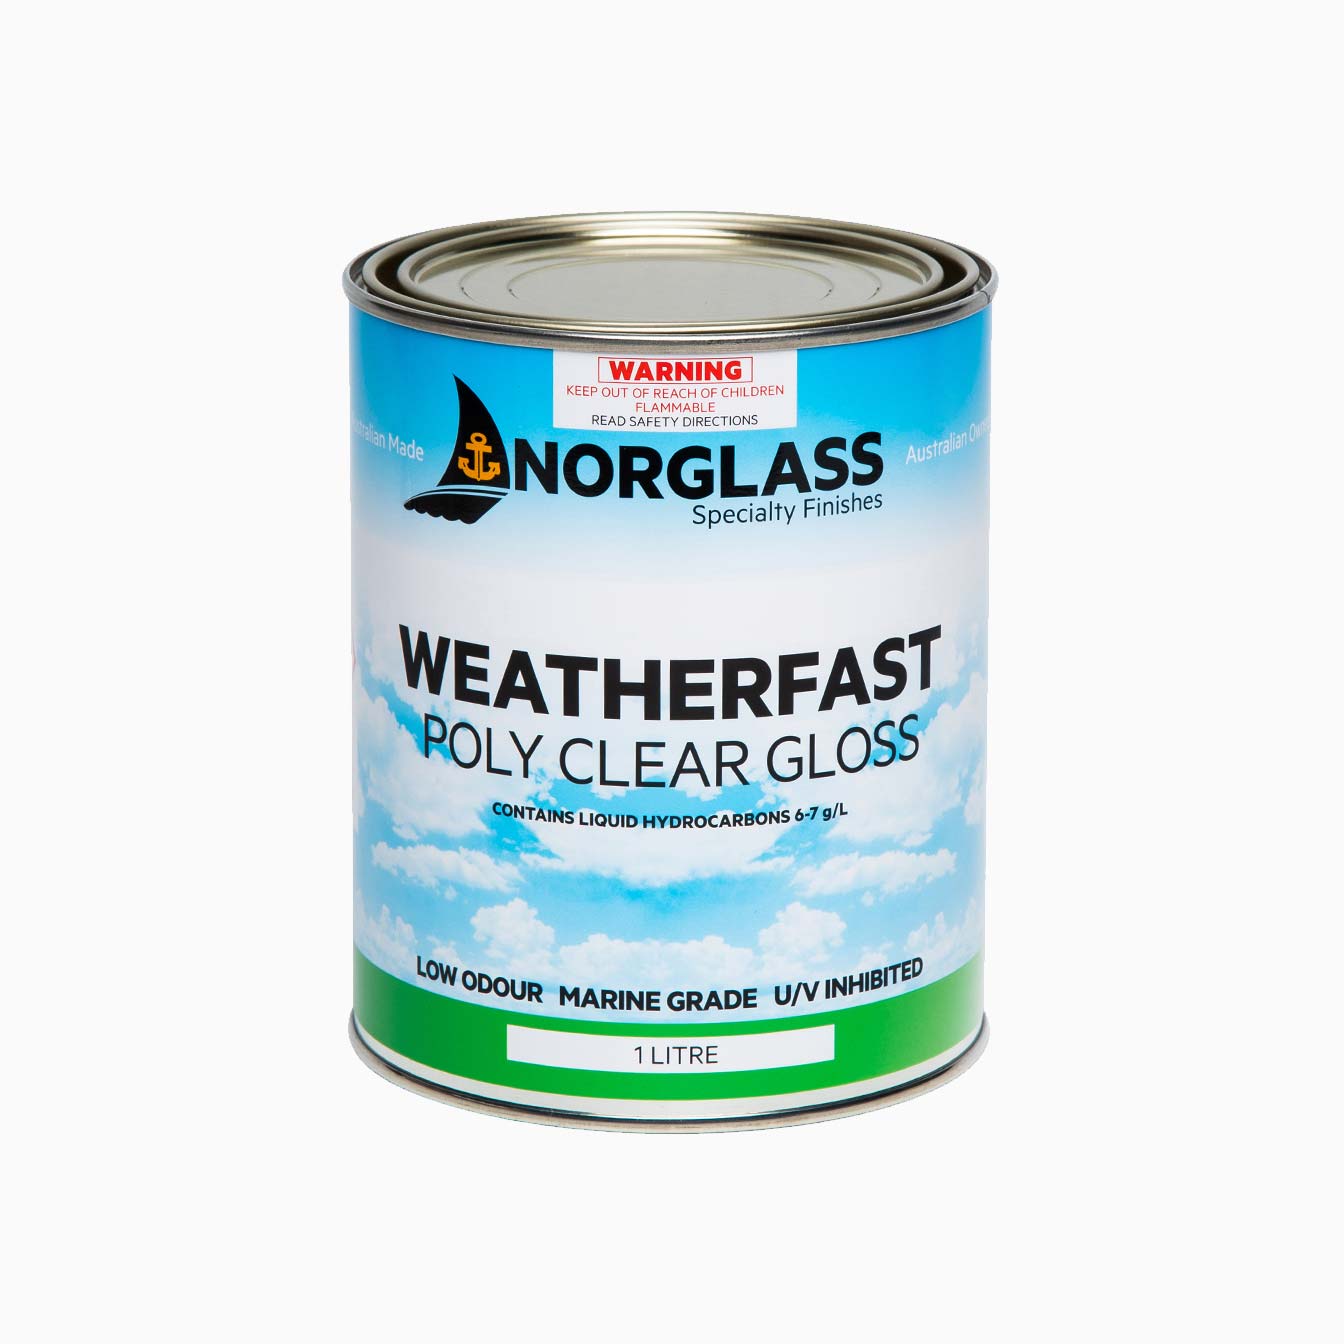 Weatherfast Poly Clear Gloss